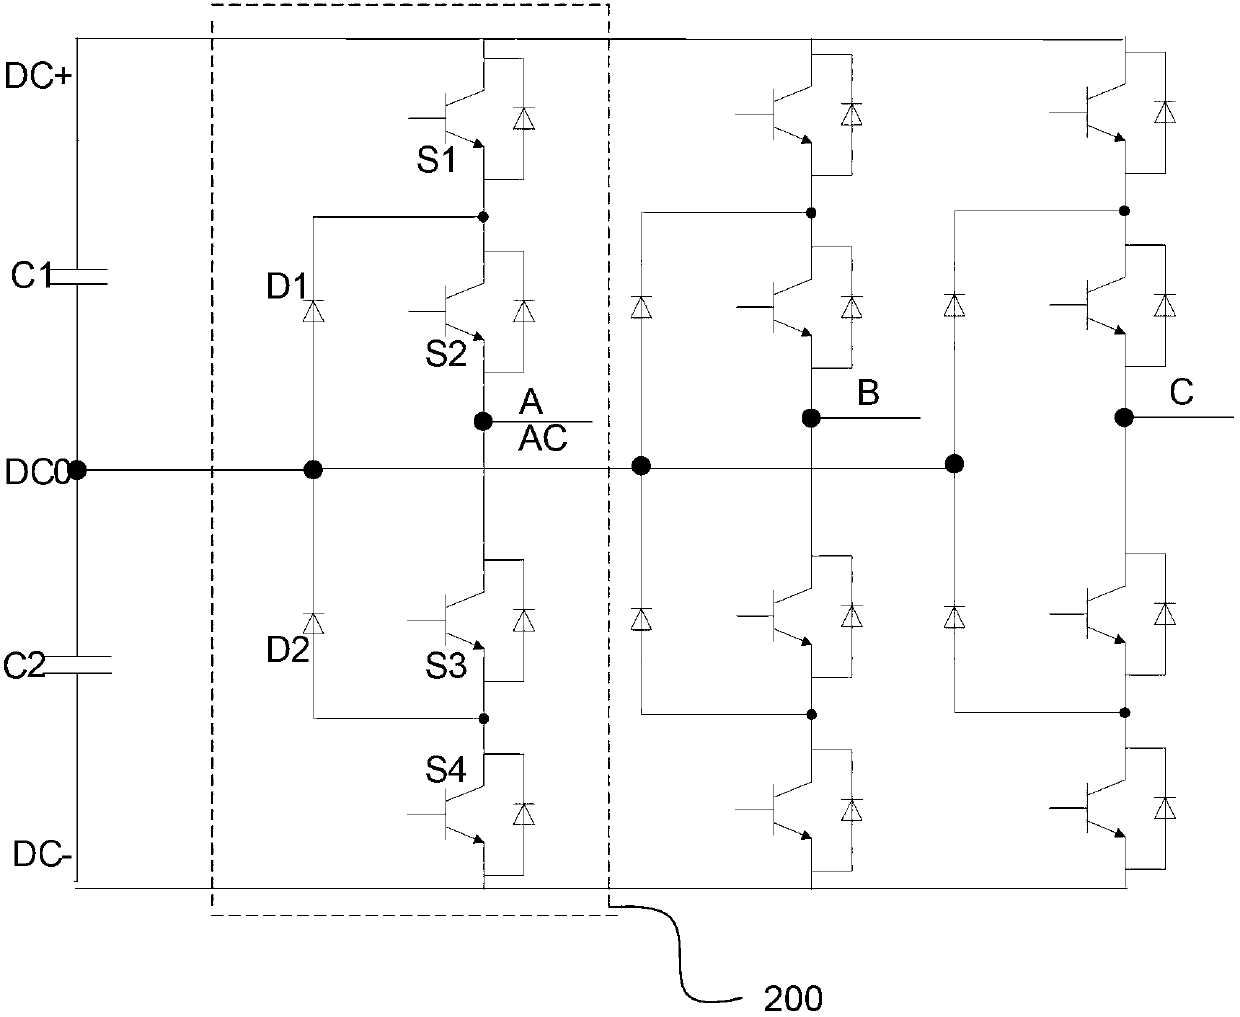 Modularized structure of three-level converter